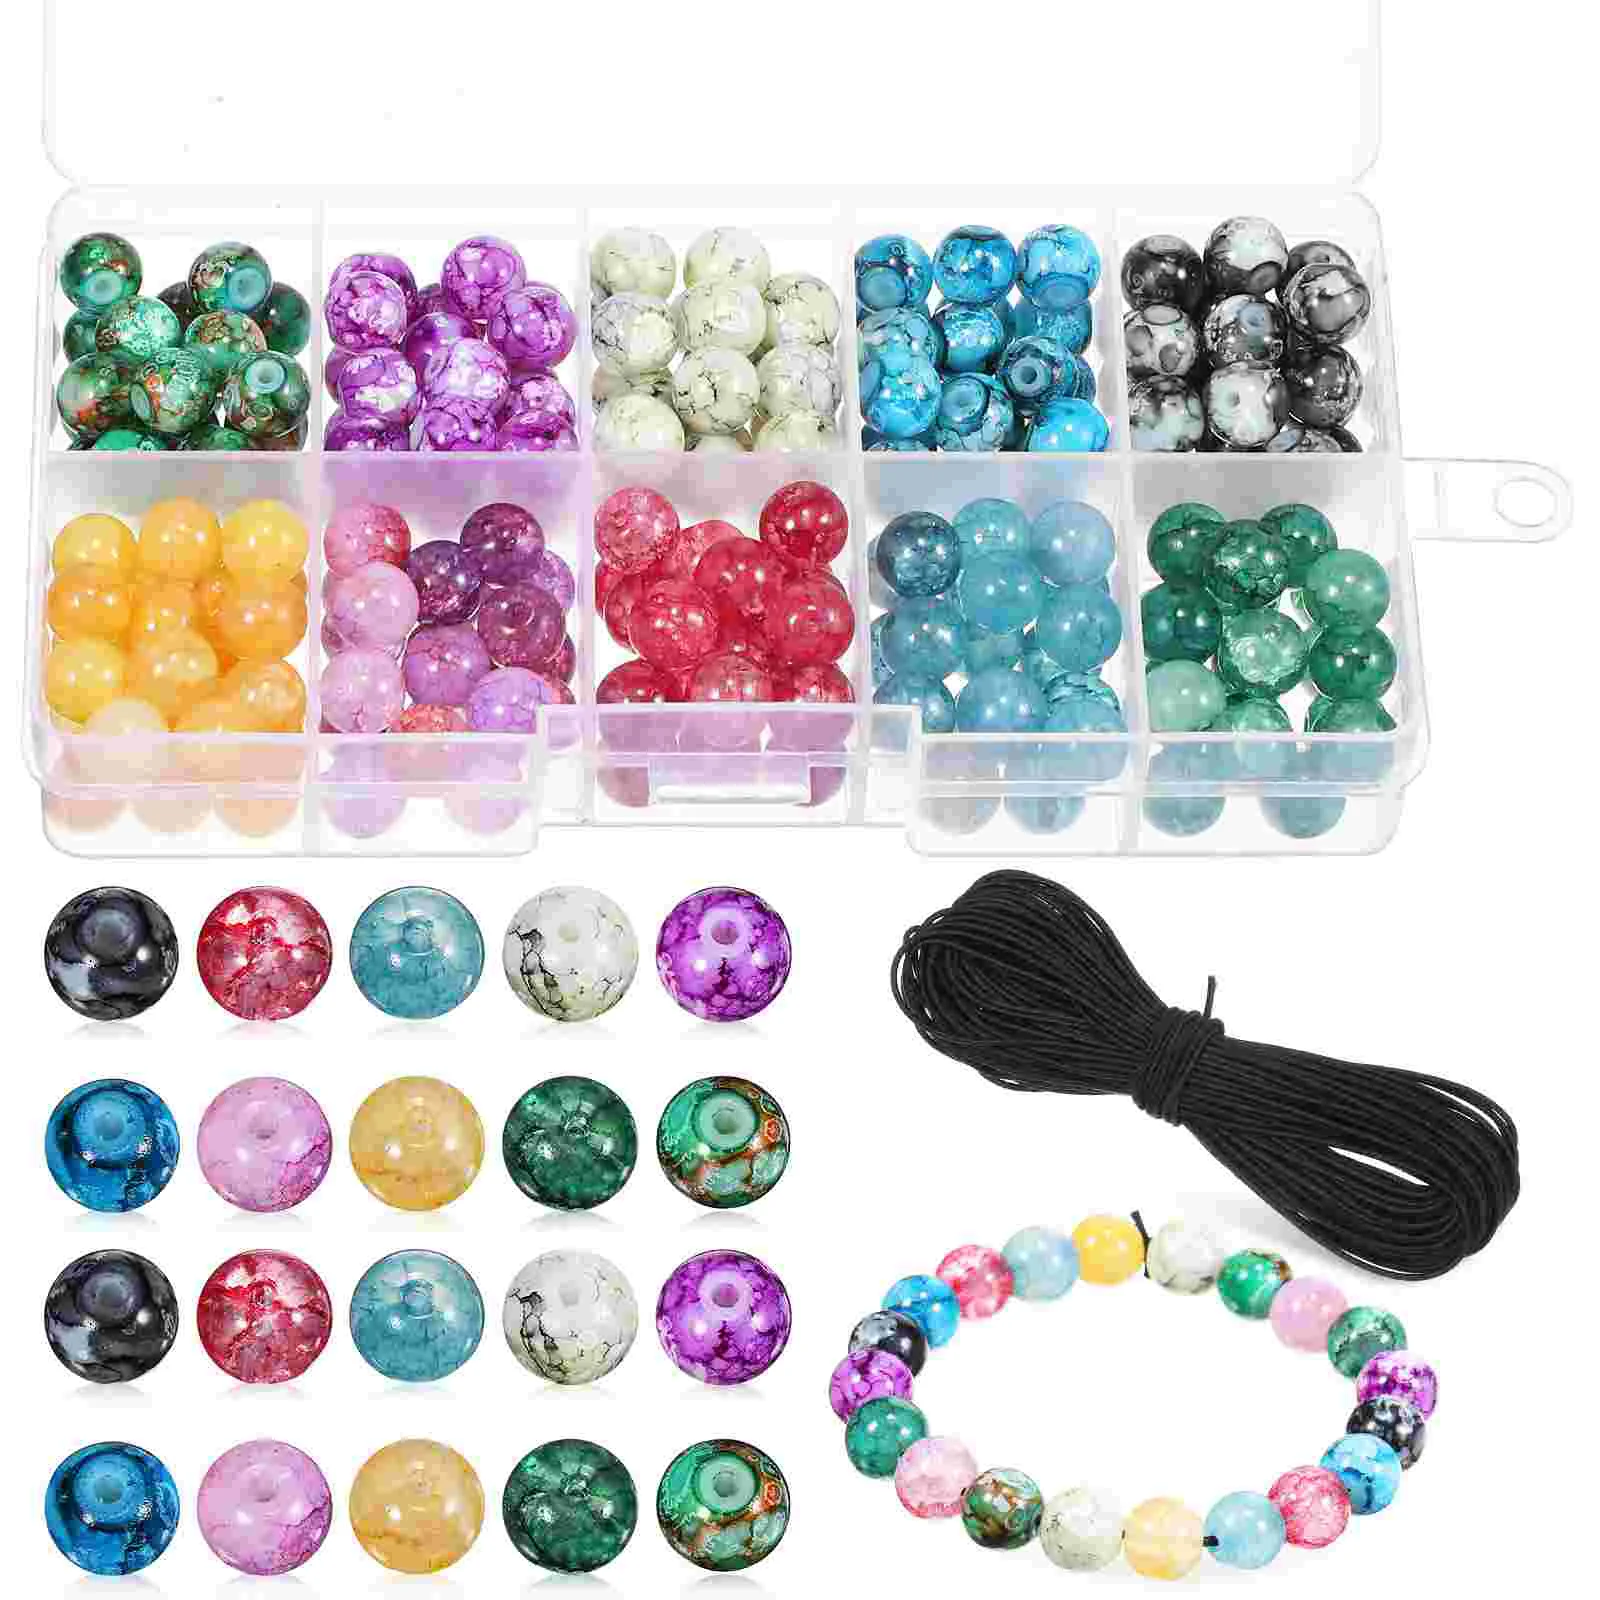 

200pcs Round Beads Jewelry Spacer Beads Small Charm Beads with Elastic Rope for Necklace Bracelet